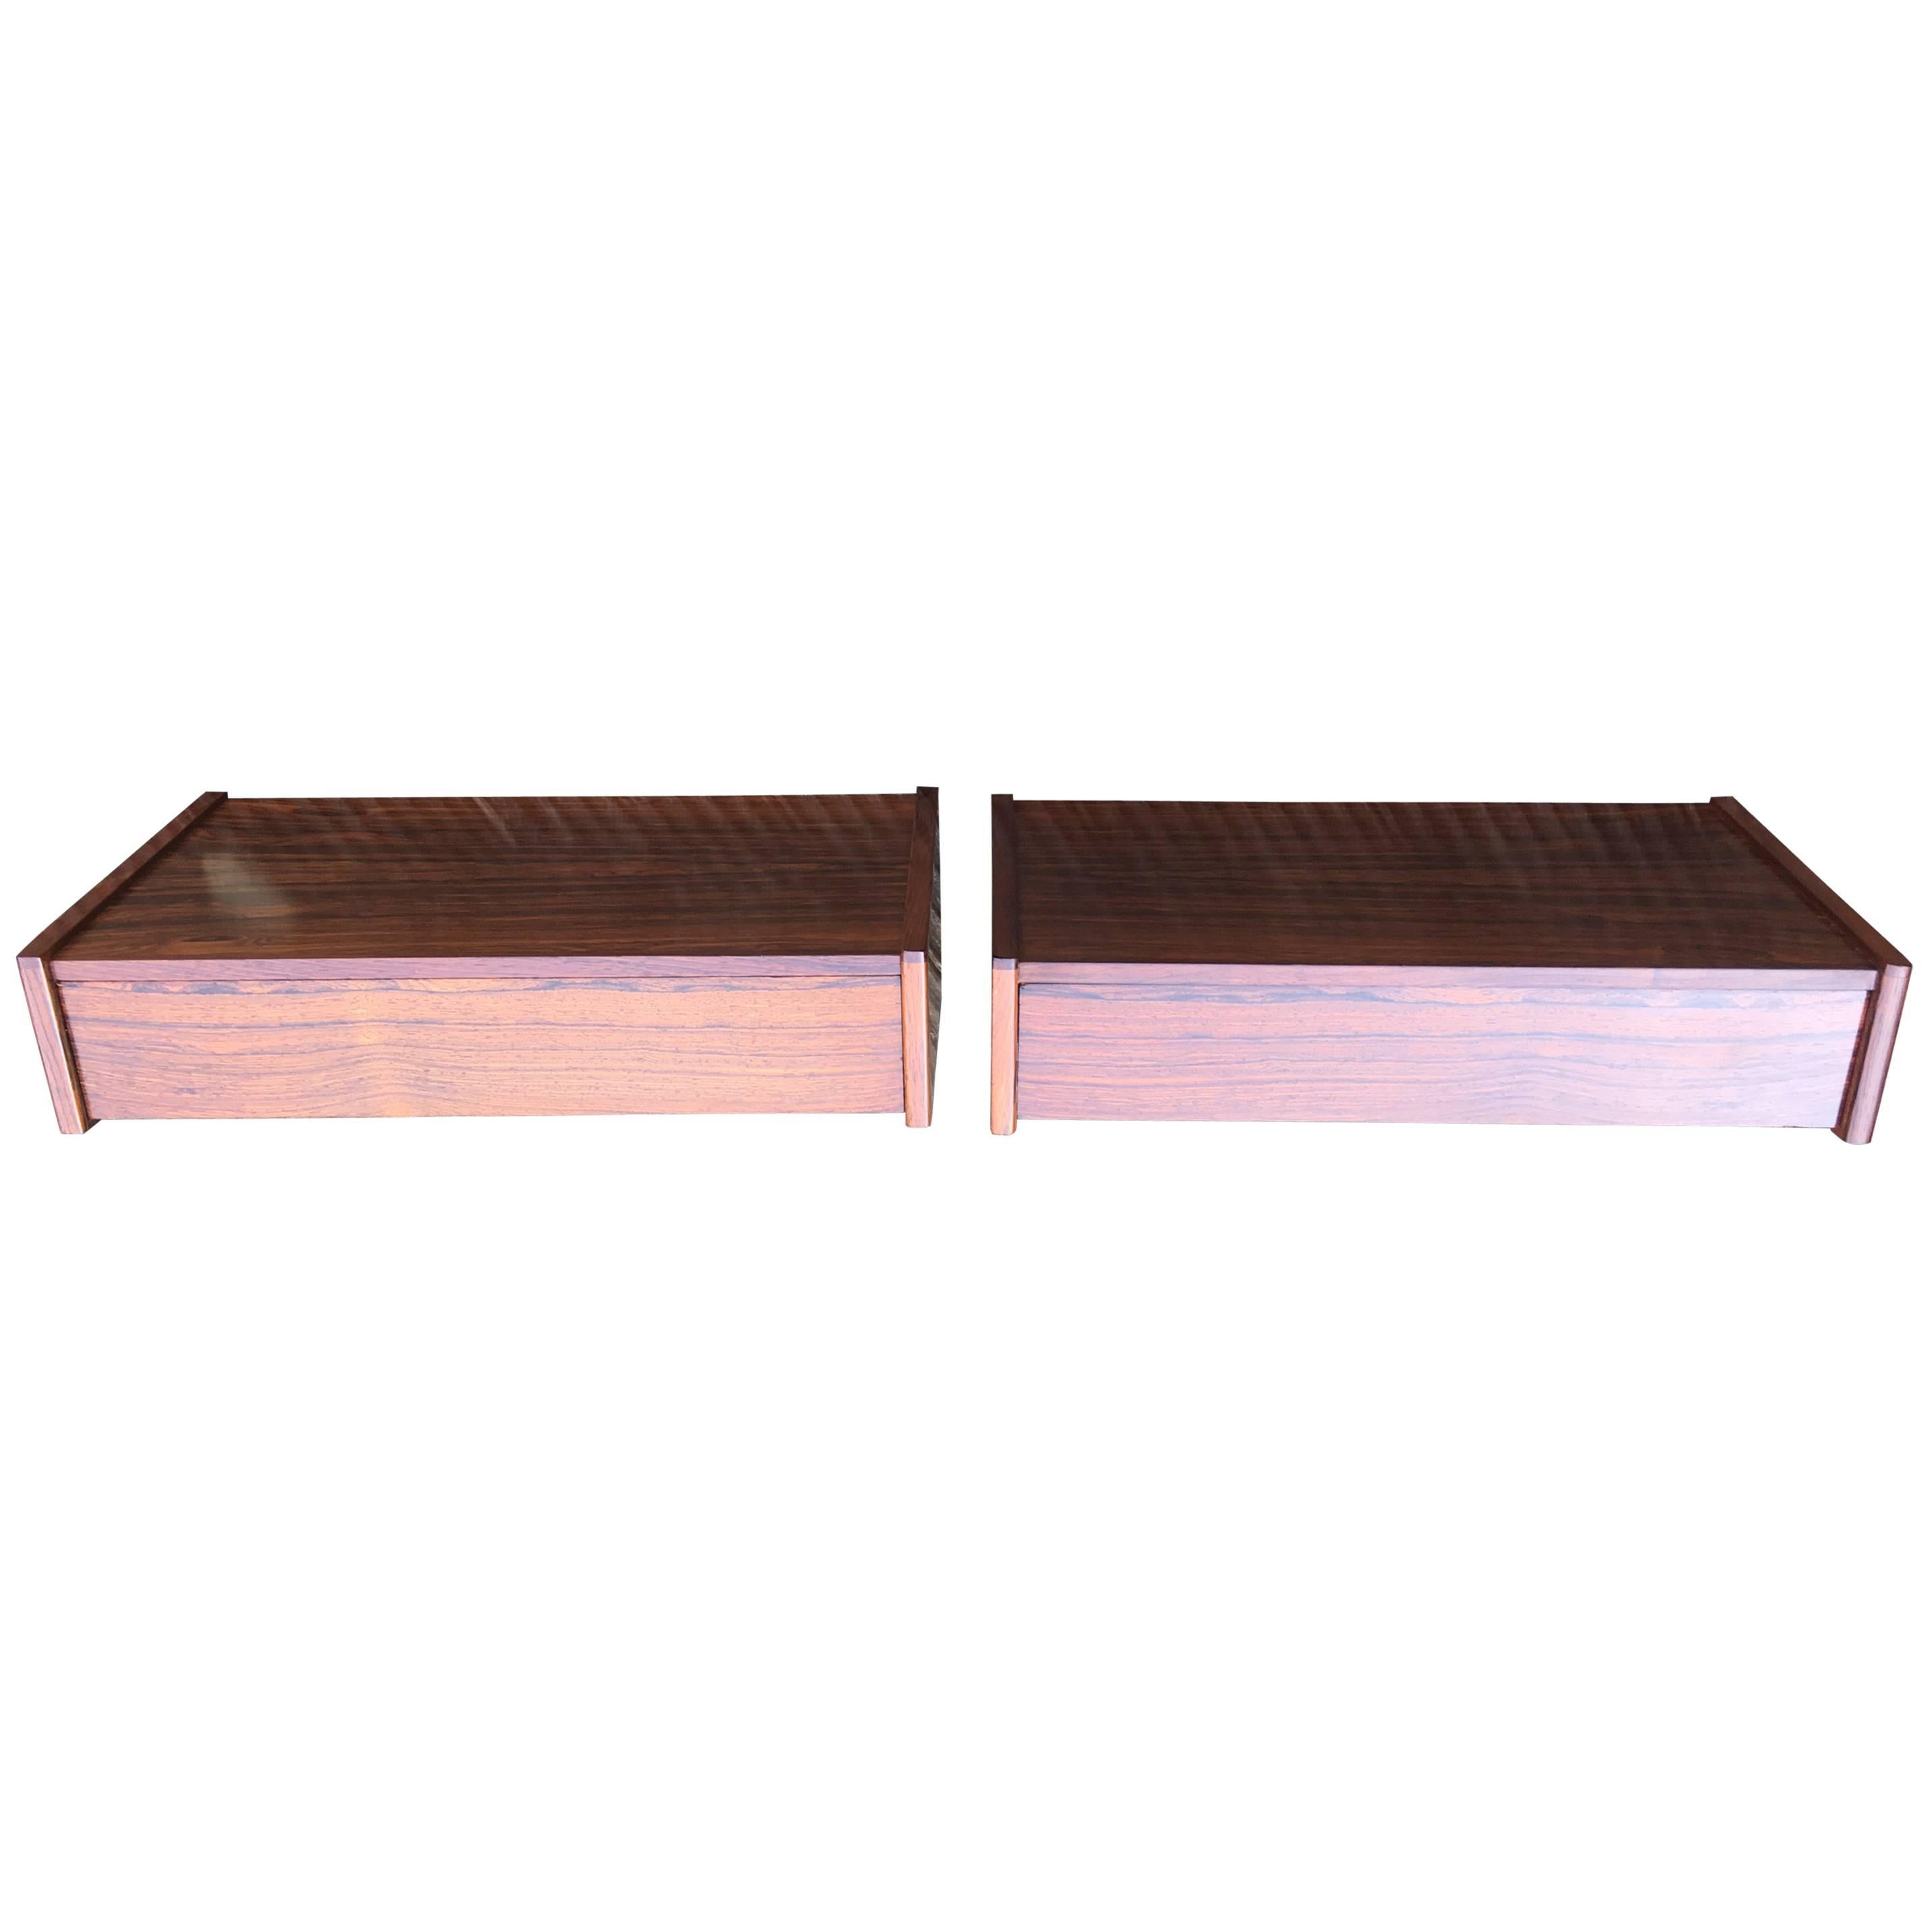 Pair of Danish Rosewood Midcentury Floating Bedside Tables